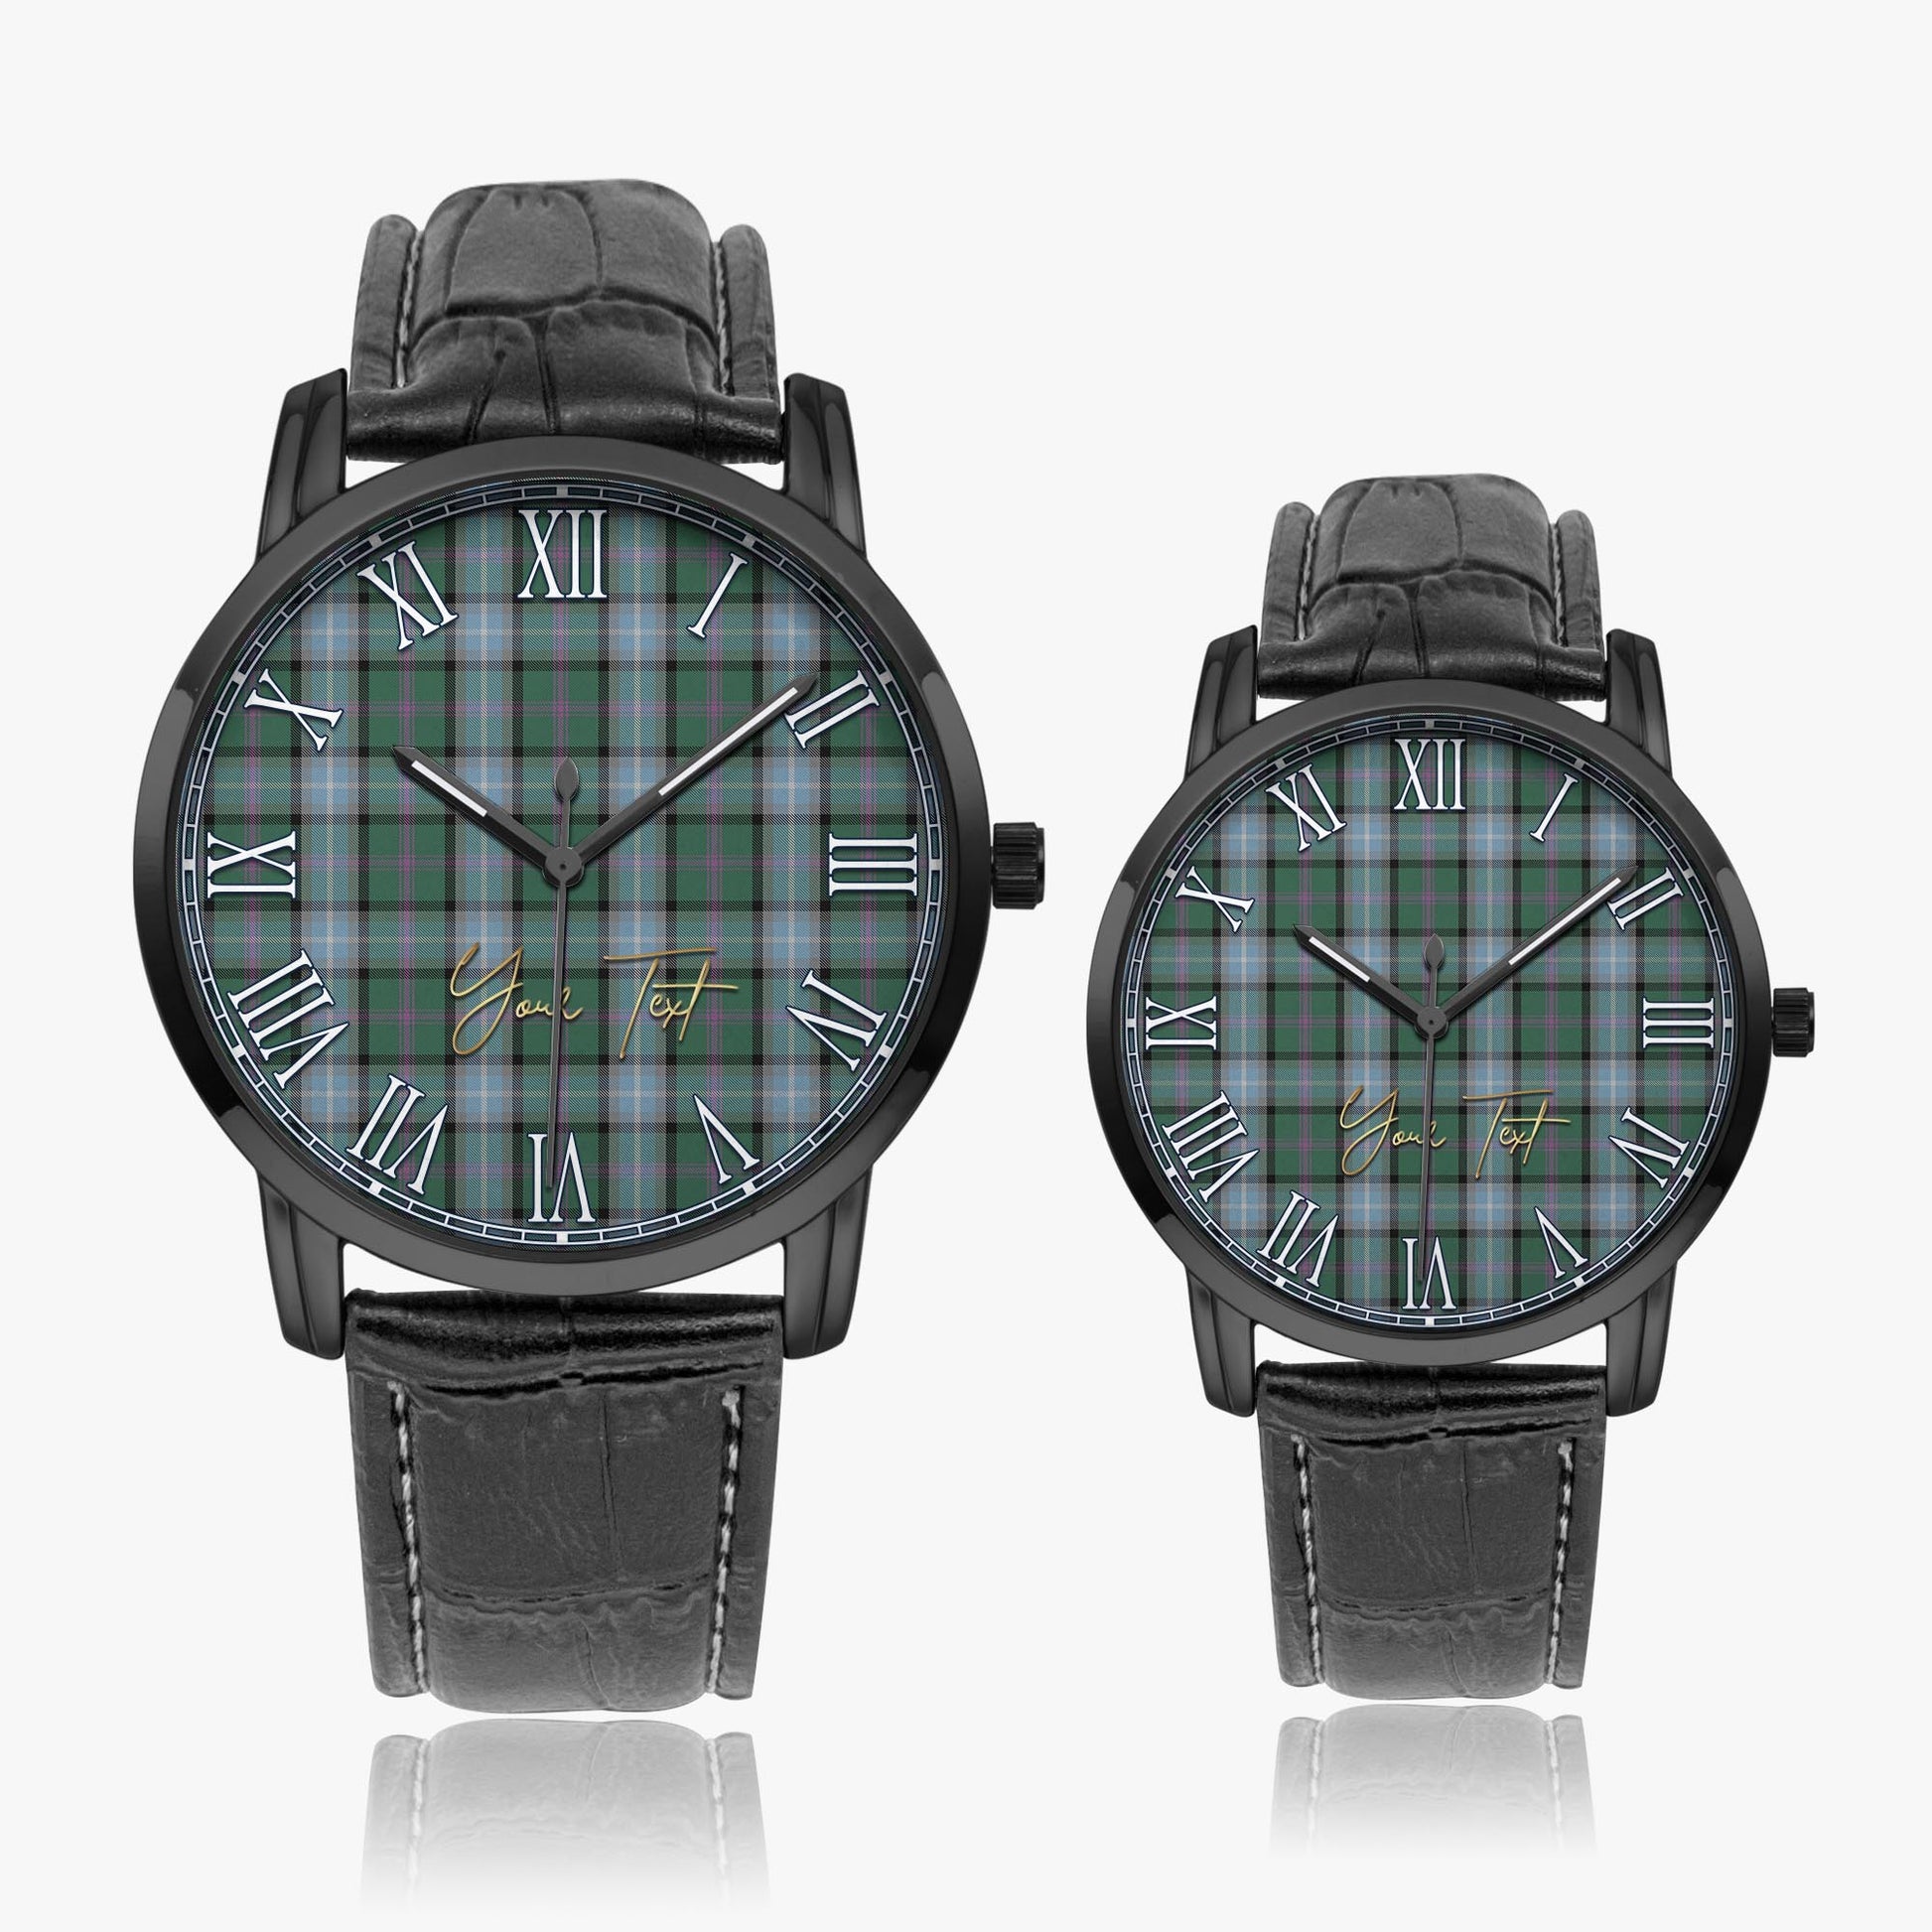 Alexander of Menstry Hunting Tartan Personalized Your Text Leather Trap Quartz Watch Wide Type Black Case With Black Leather Strap - Tartanvibesclothing